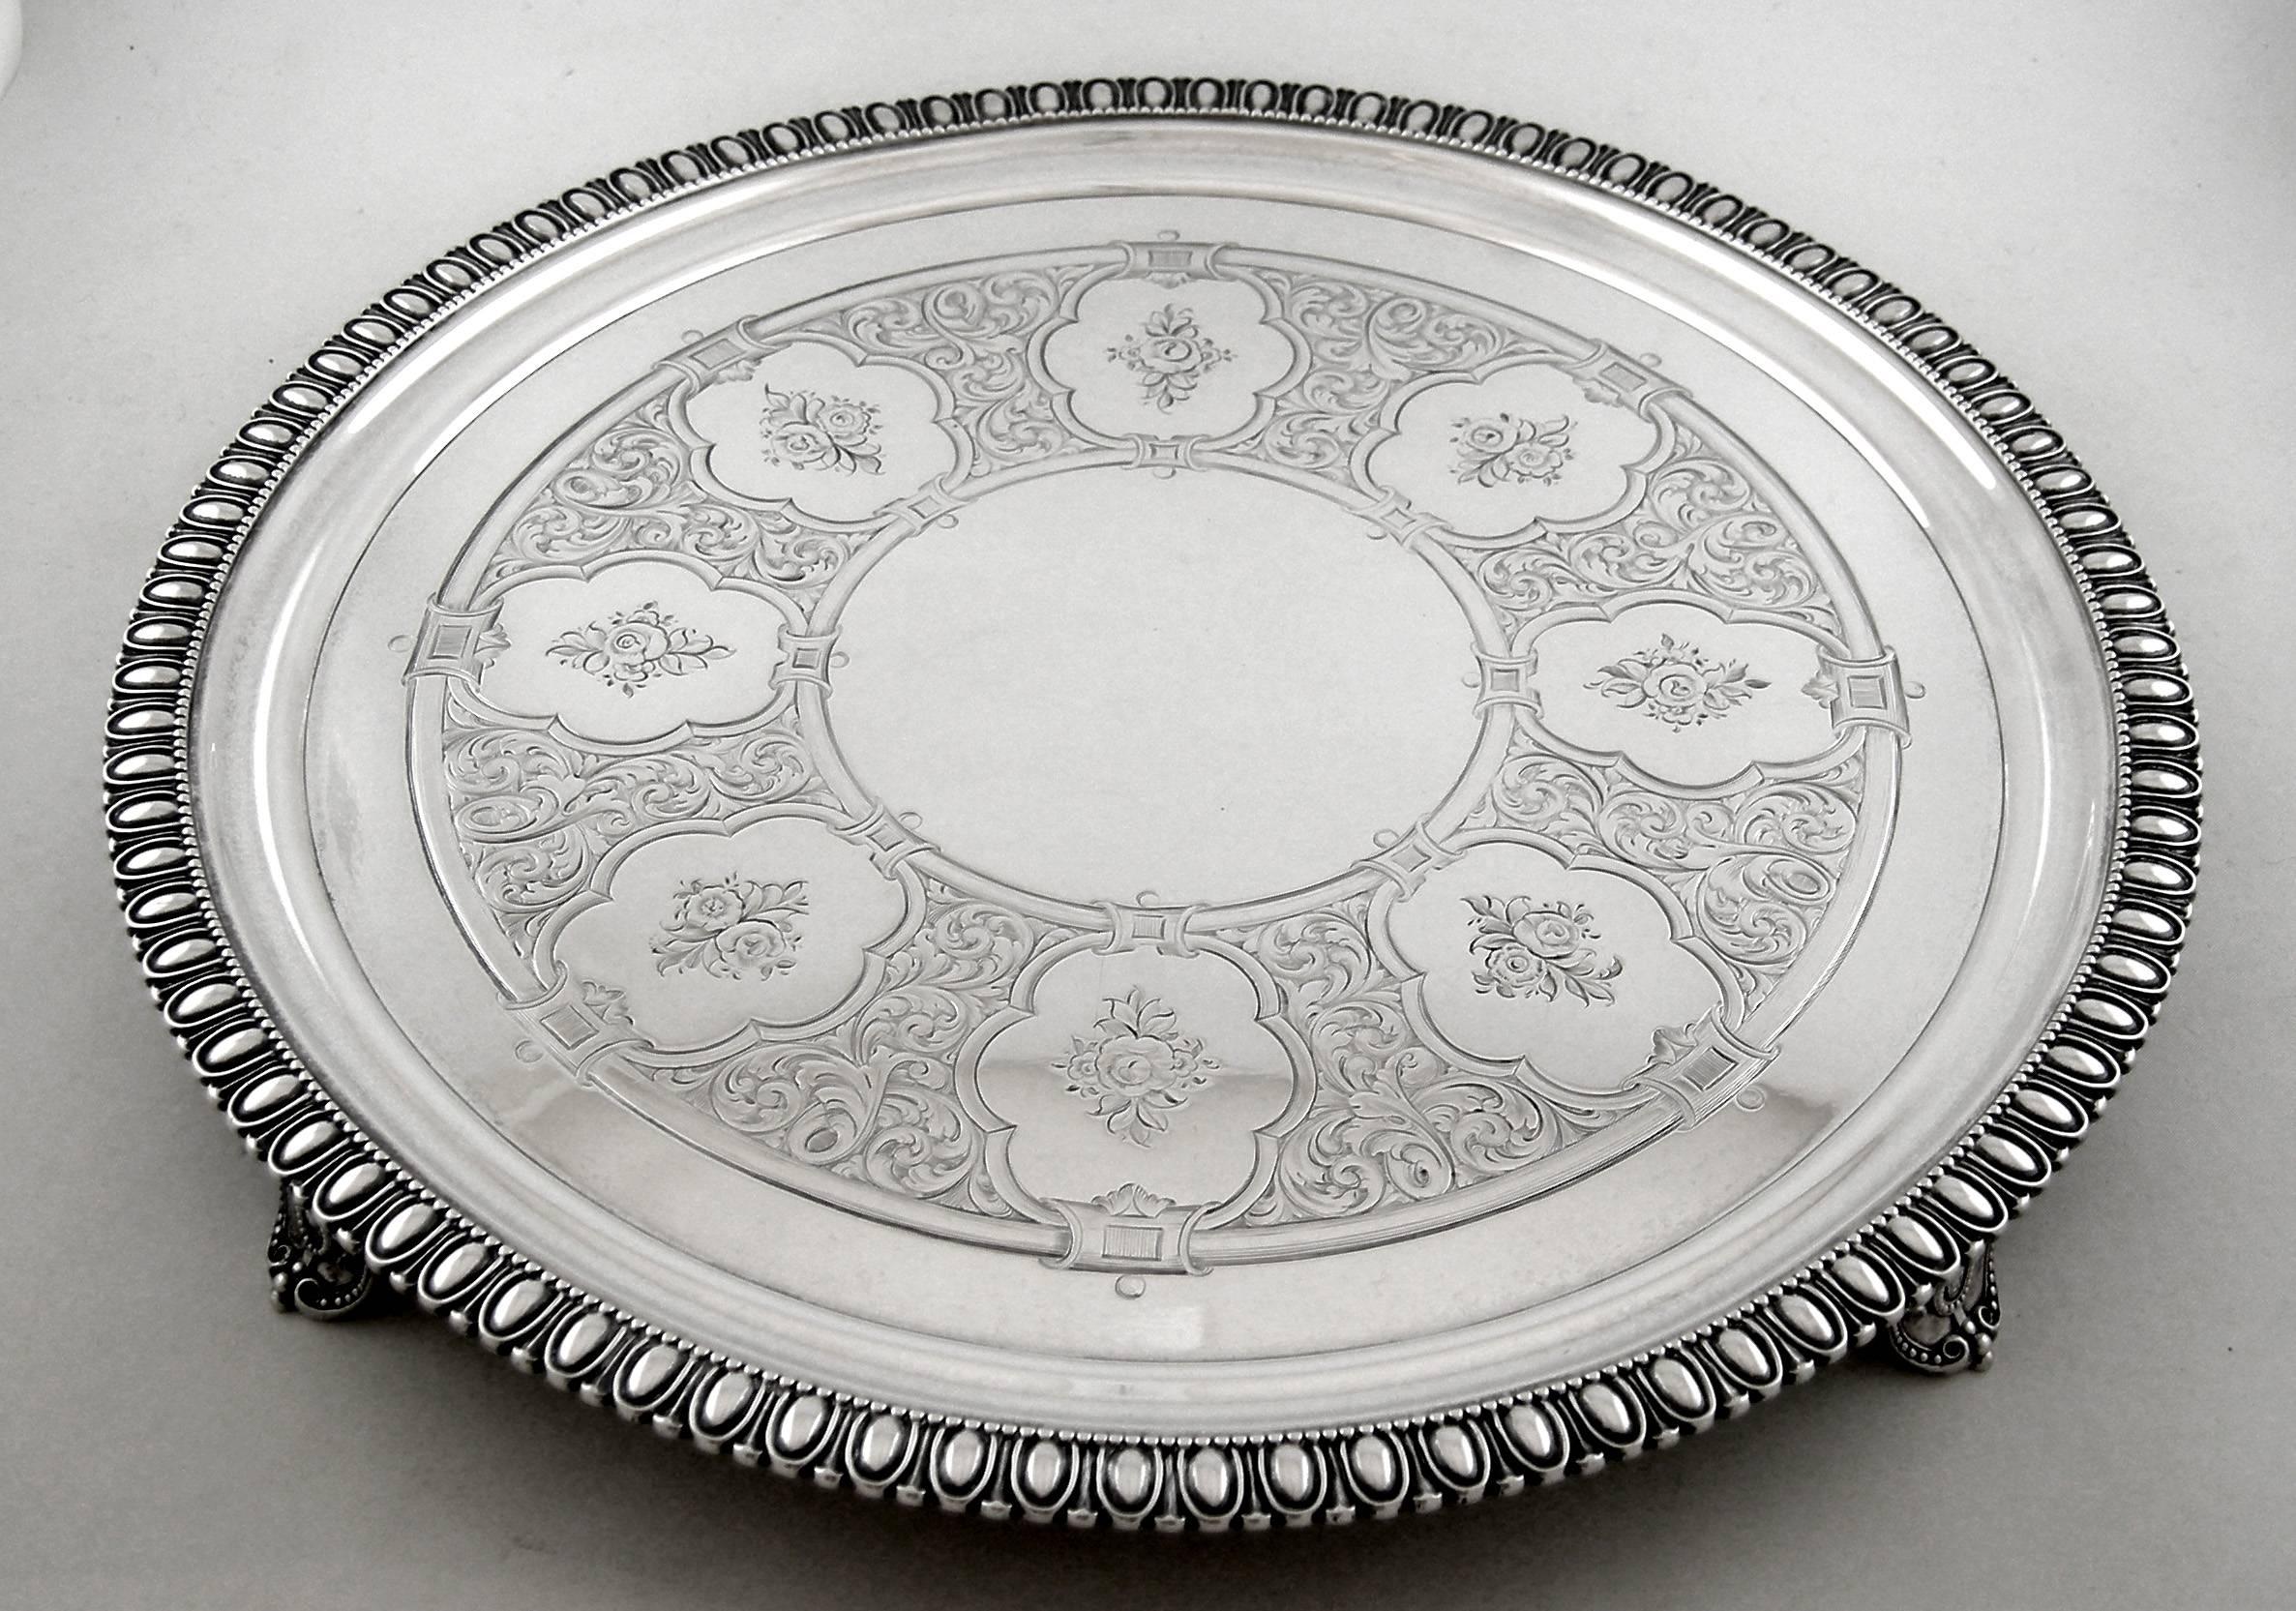 Sterling Tiffany & Co. 550 Broadway footed tray, circa 1855-1860.